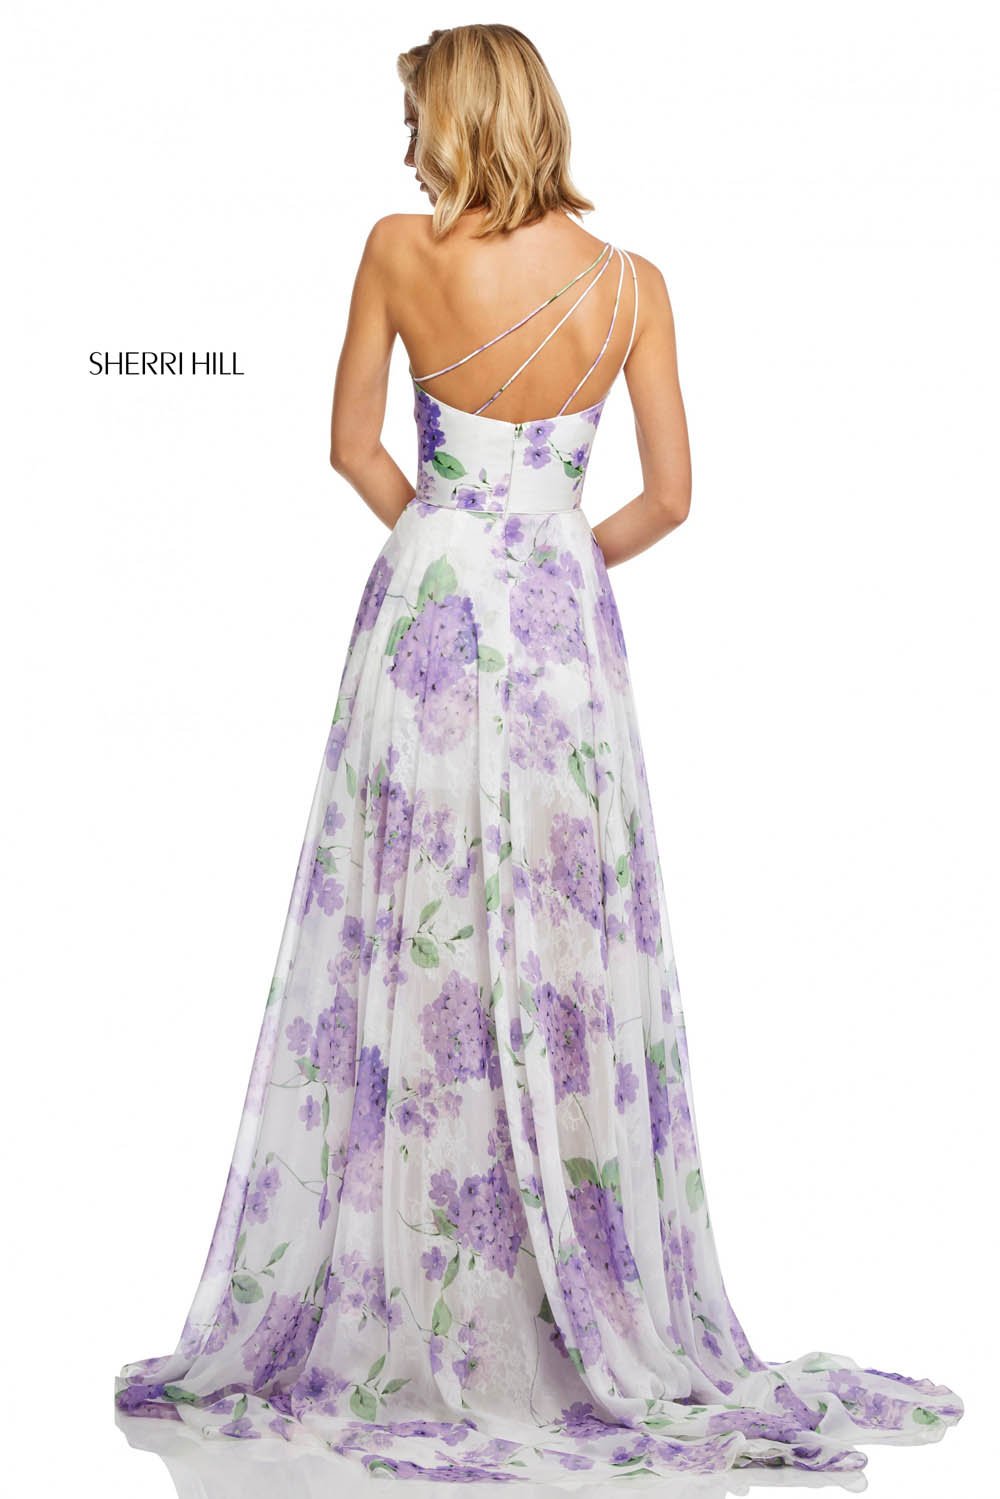 Sherri Hill 52727 dress images in these colors: Ivory Lilac Print.